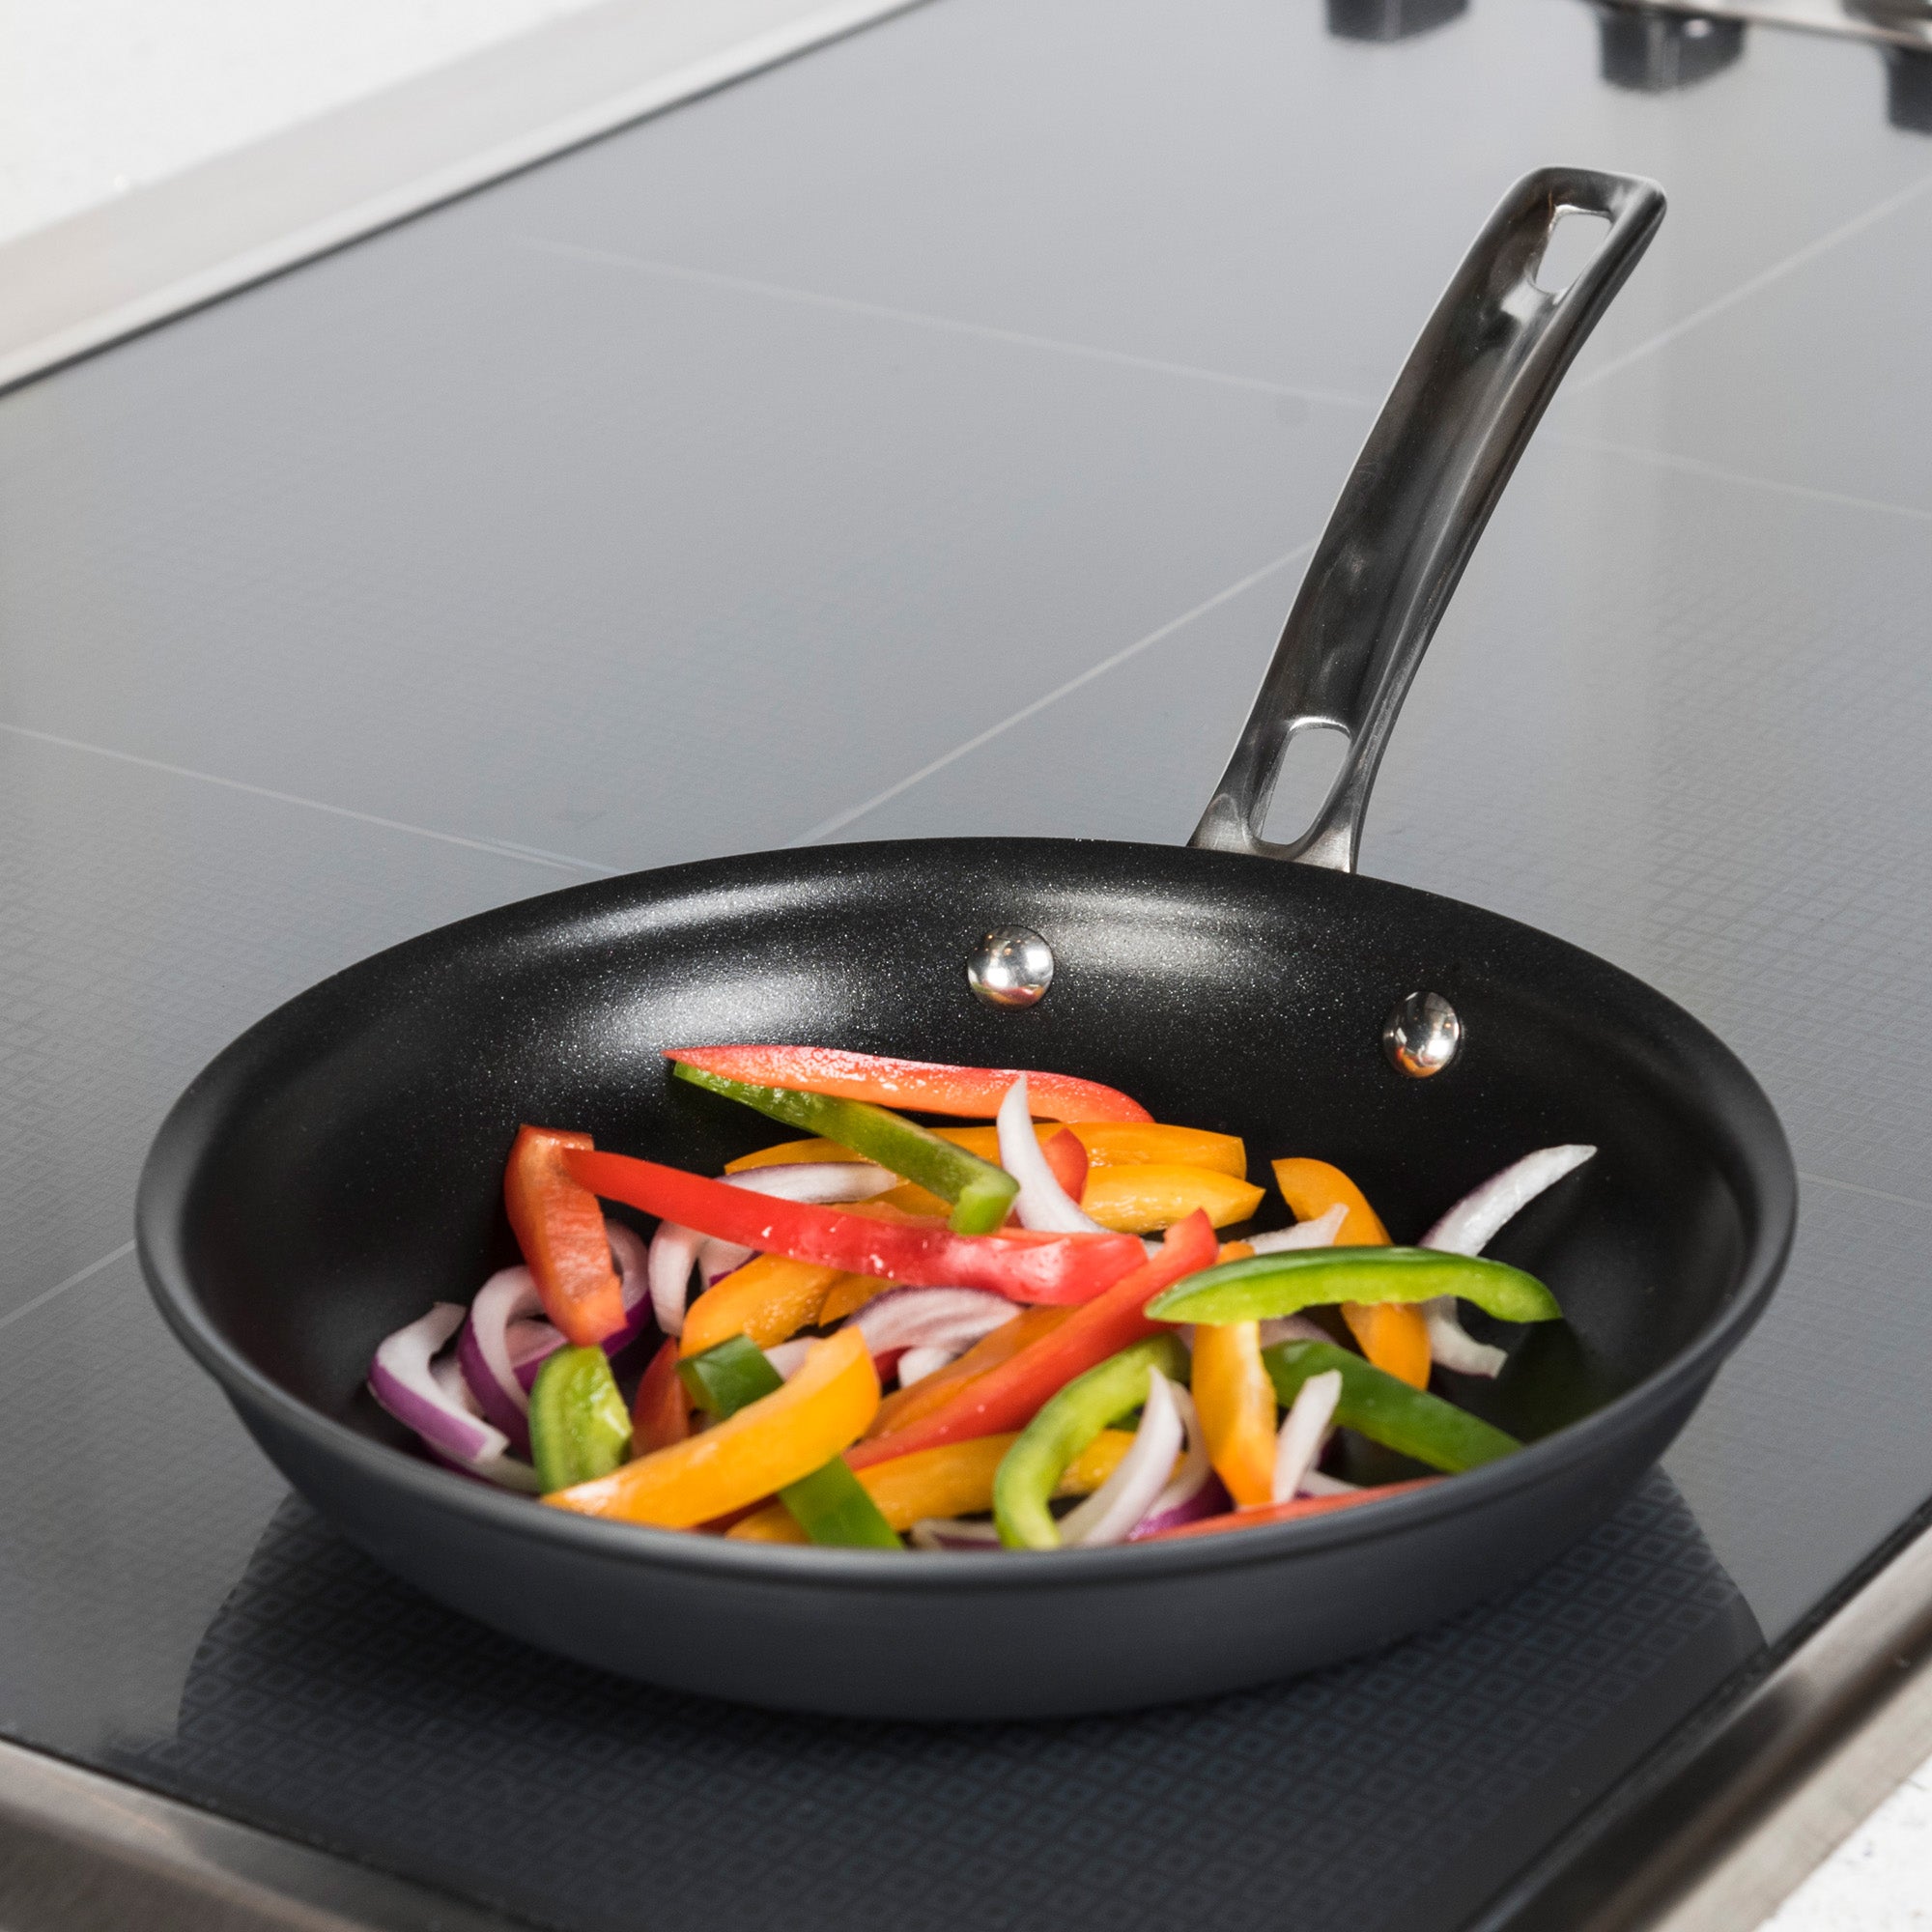 Viking Hard Anodized Nonstick Fry Pan - 8 in.